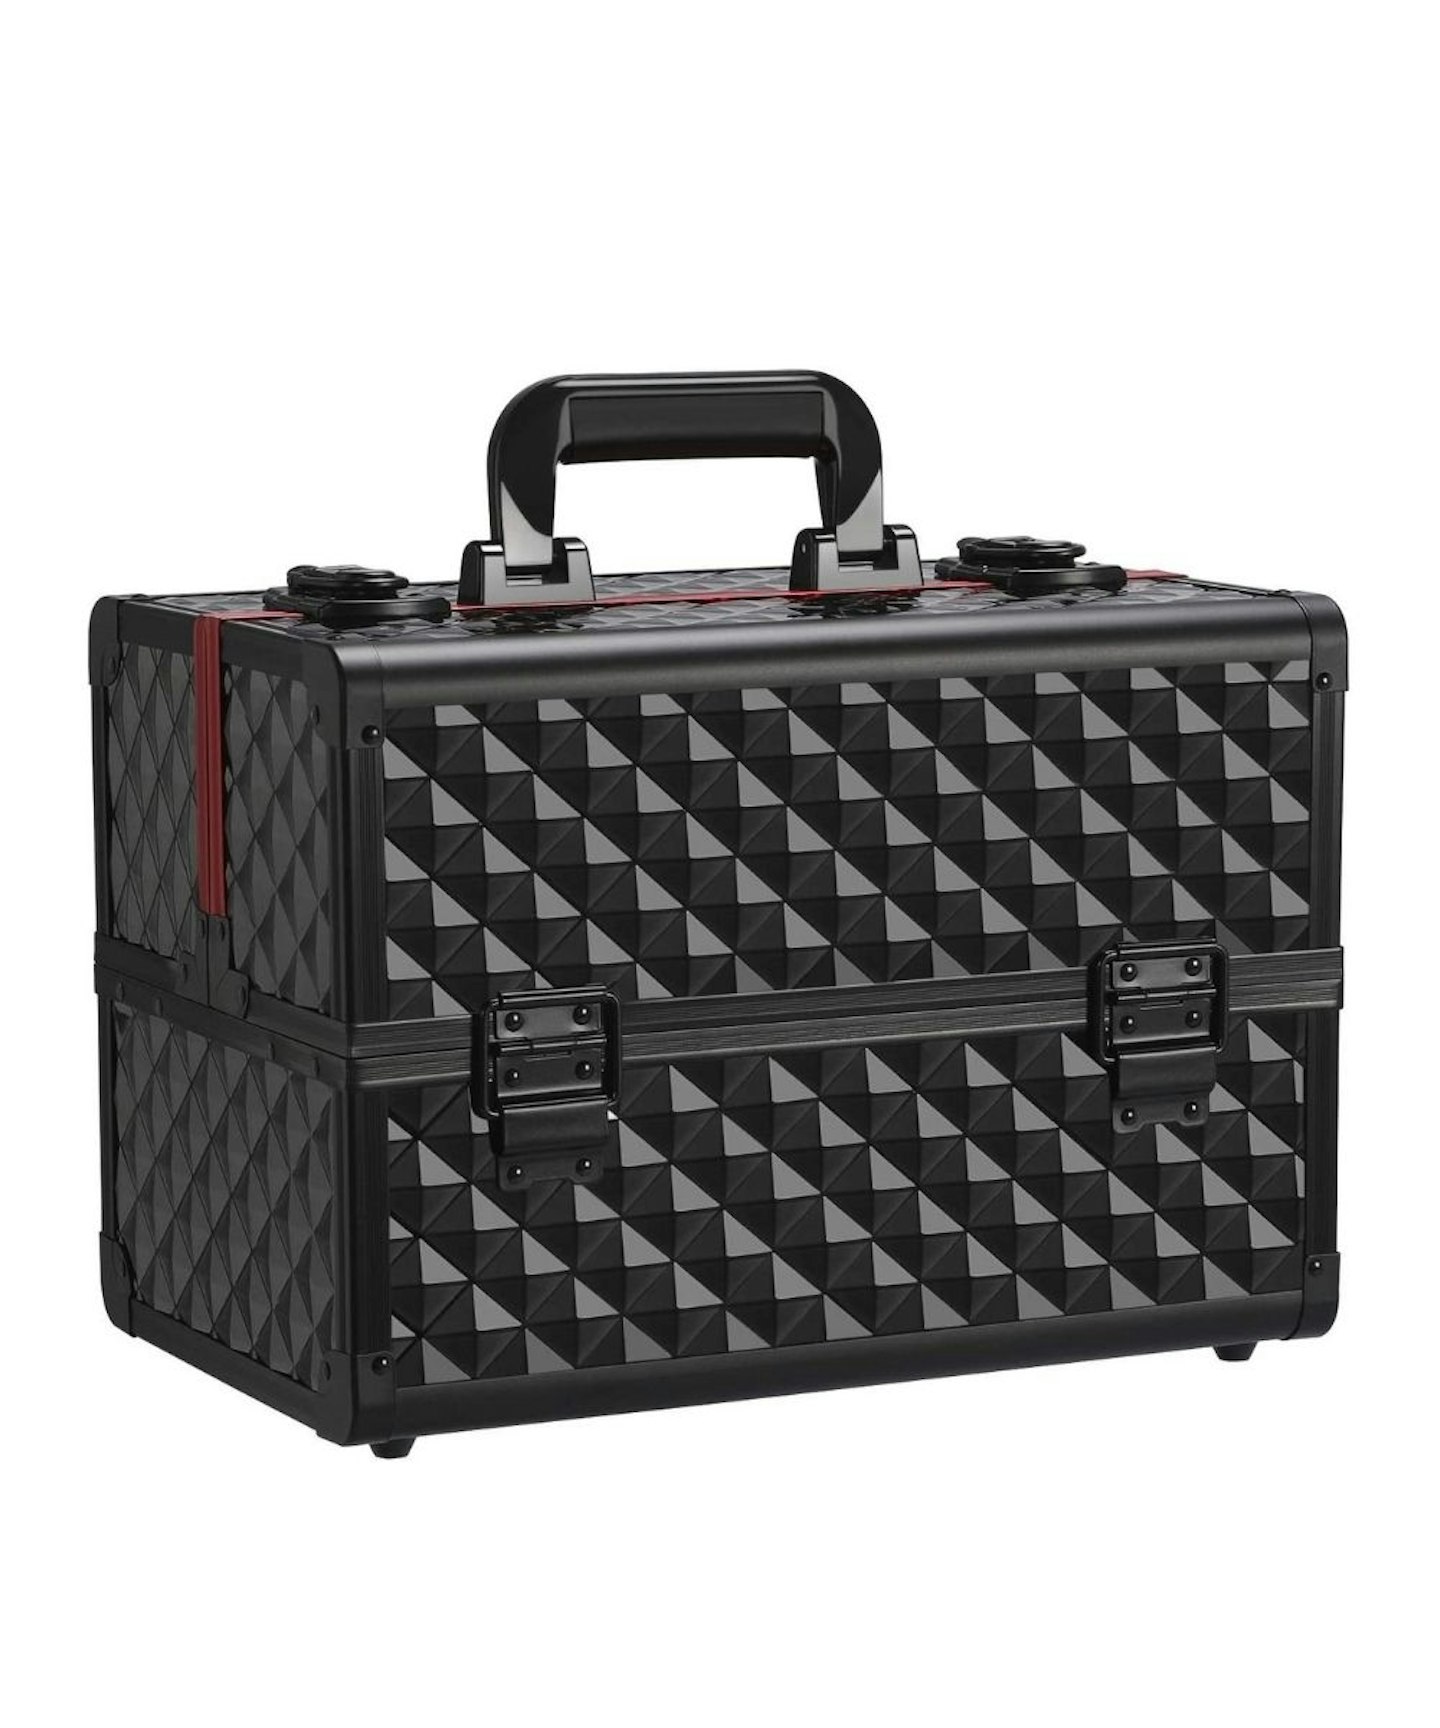 Yaheetech Makeup Box Professional Extra Large Vanity Case with 4 Trays